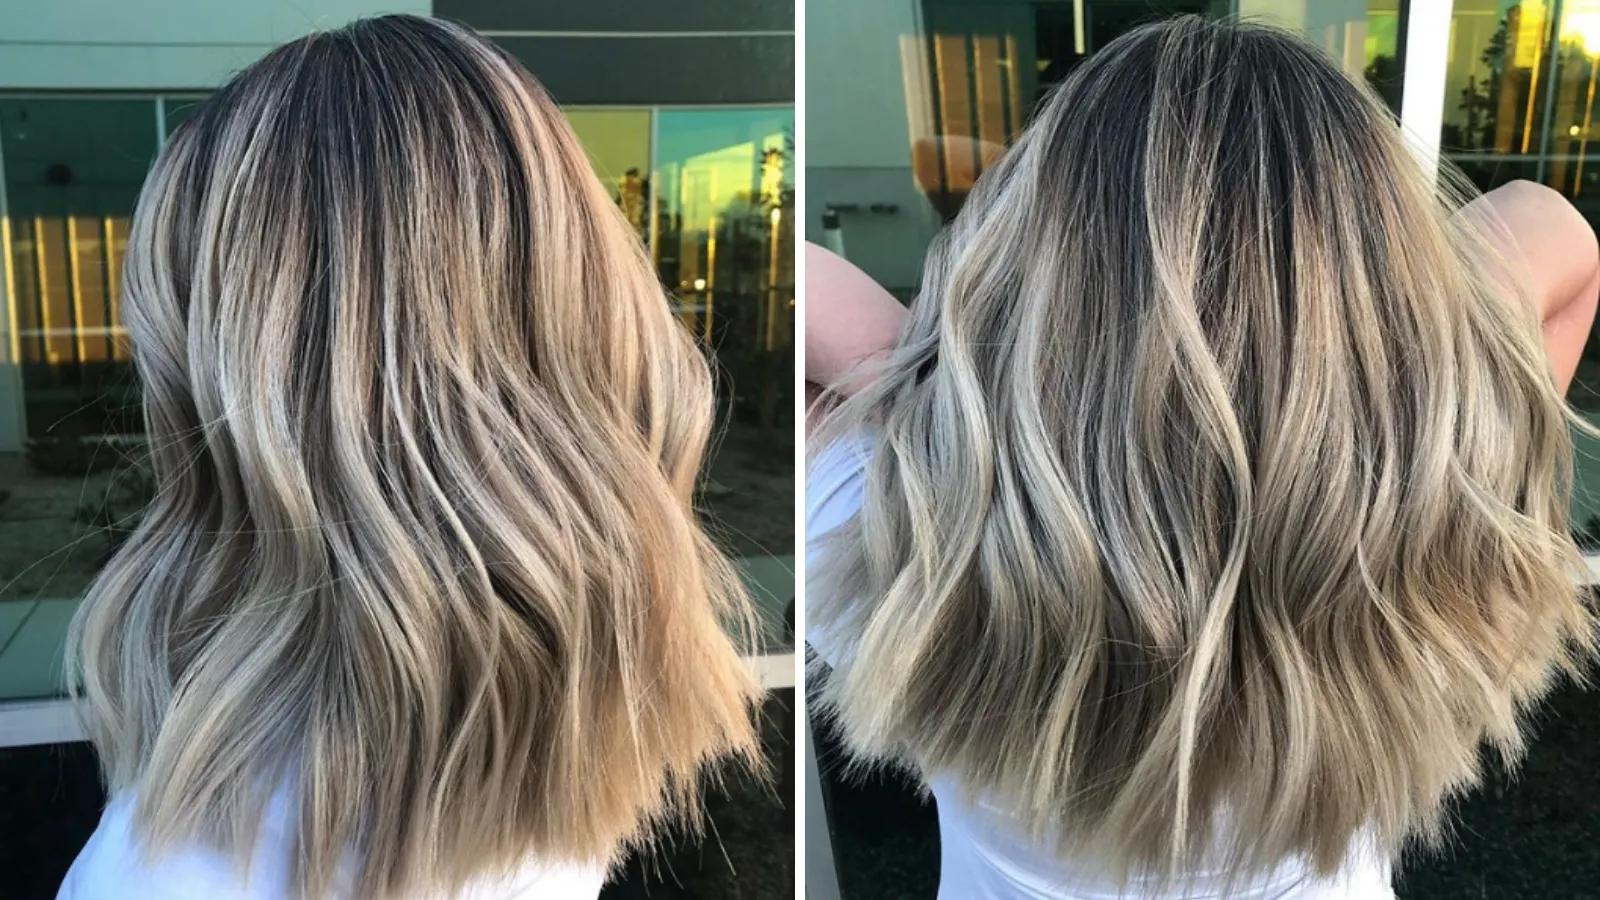 smoked marshmallow hair color - What color is smokey blonde